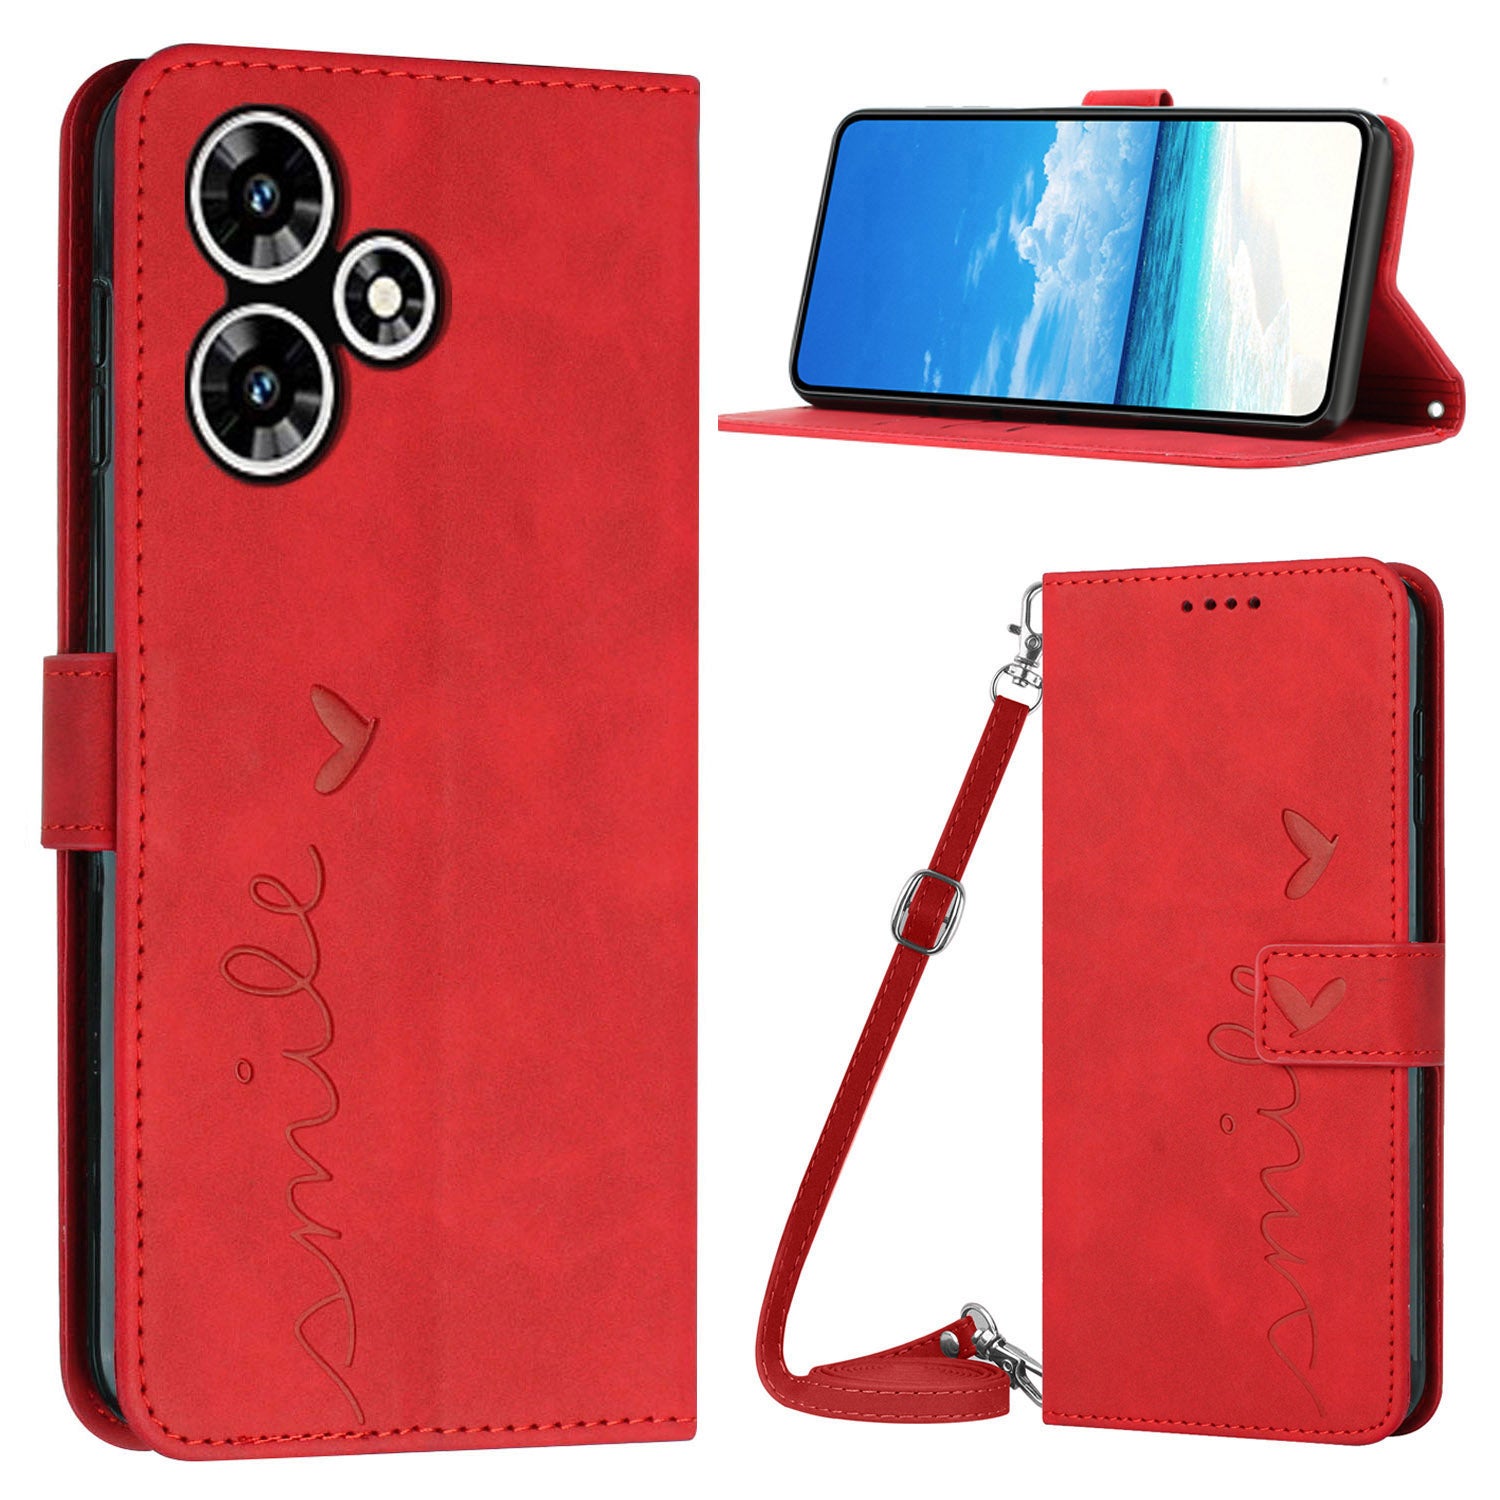 Wallet PU Leather Case for Infinix Hot 30 , Heart Shape Phone Stand Cover with Shoulder Strap - Red